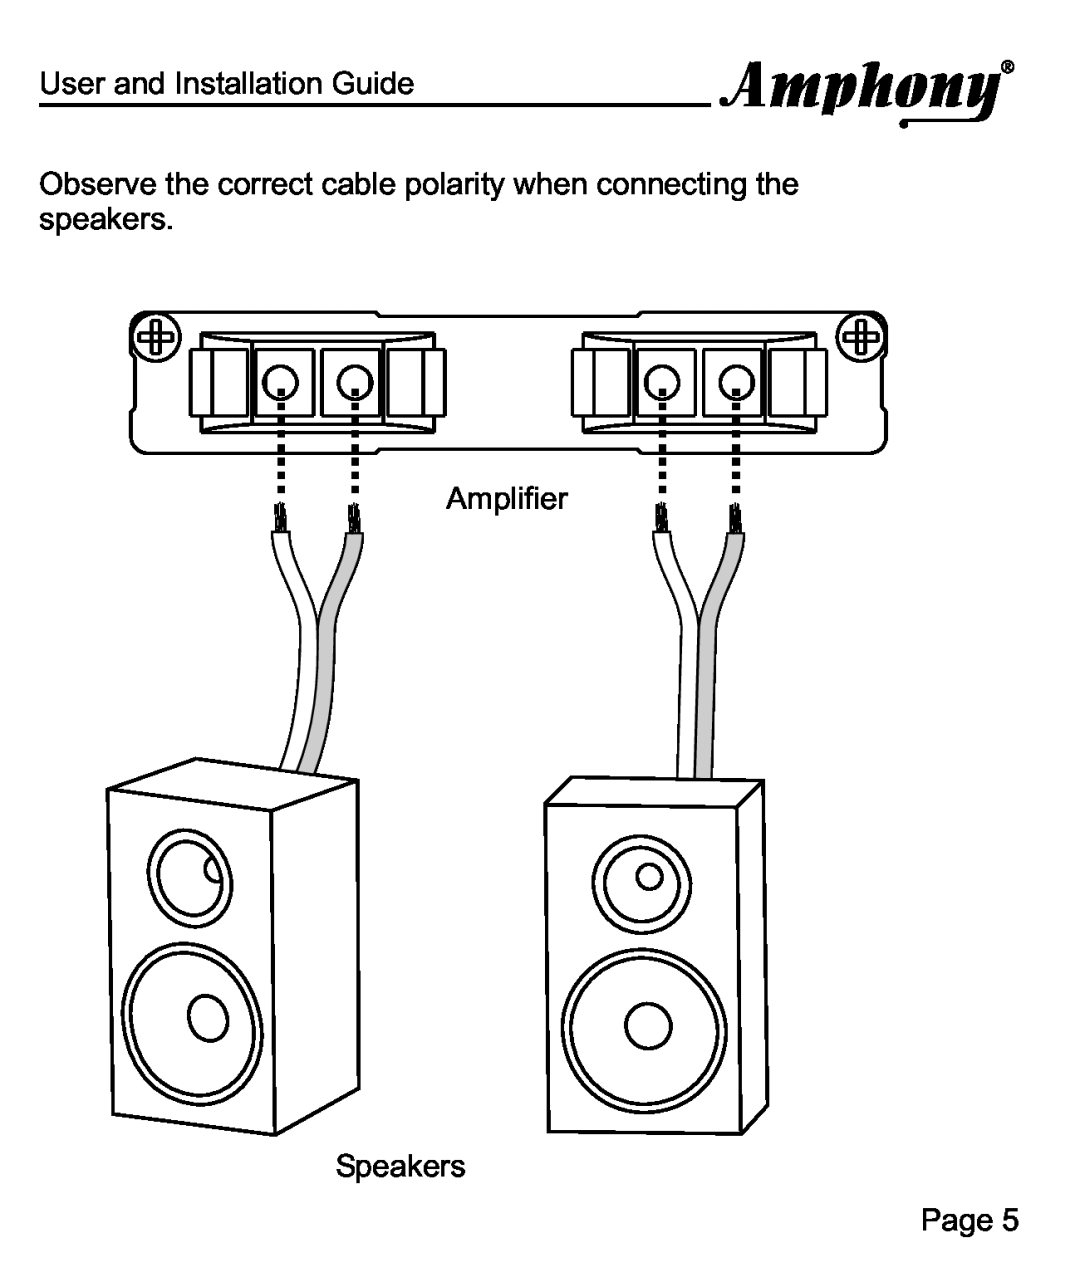 Amphony 100 manual User and Installation Guide, Amplifier Speakers Page 